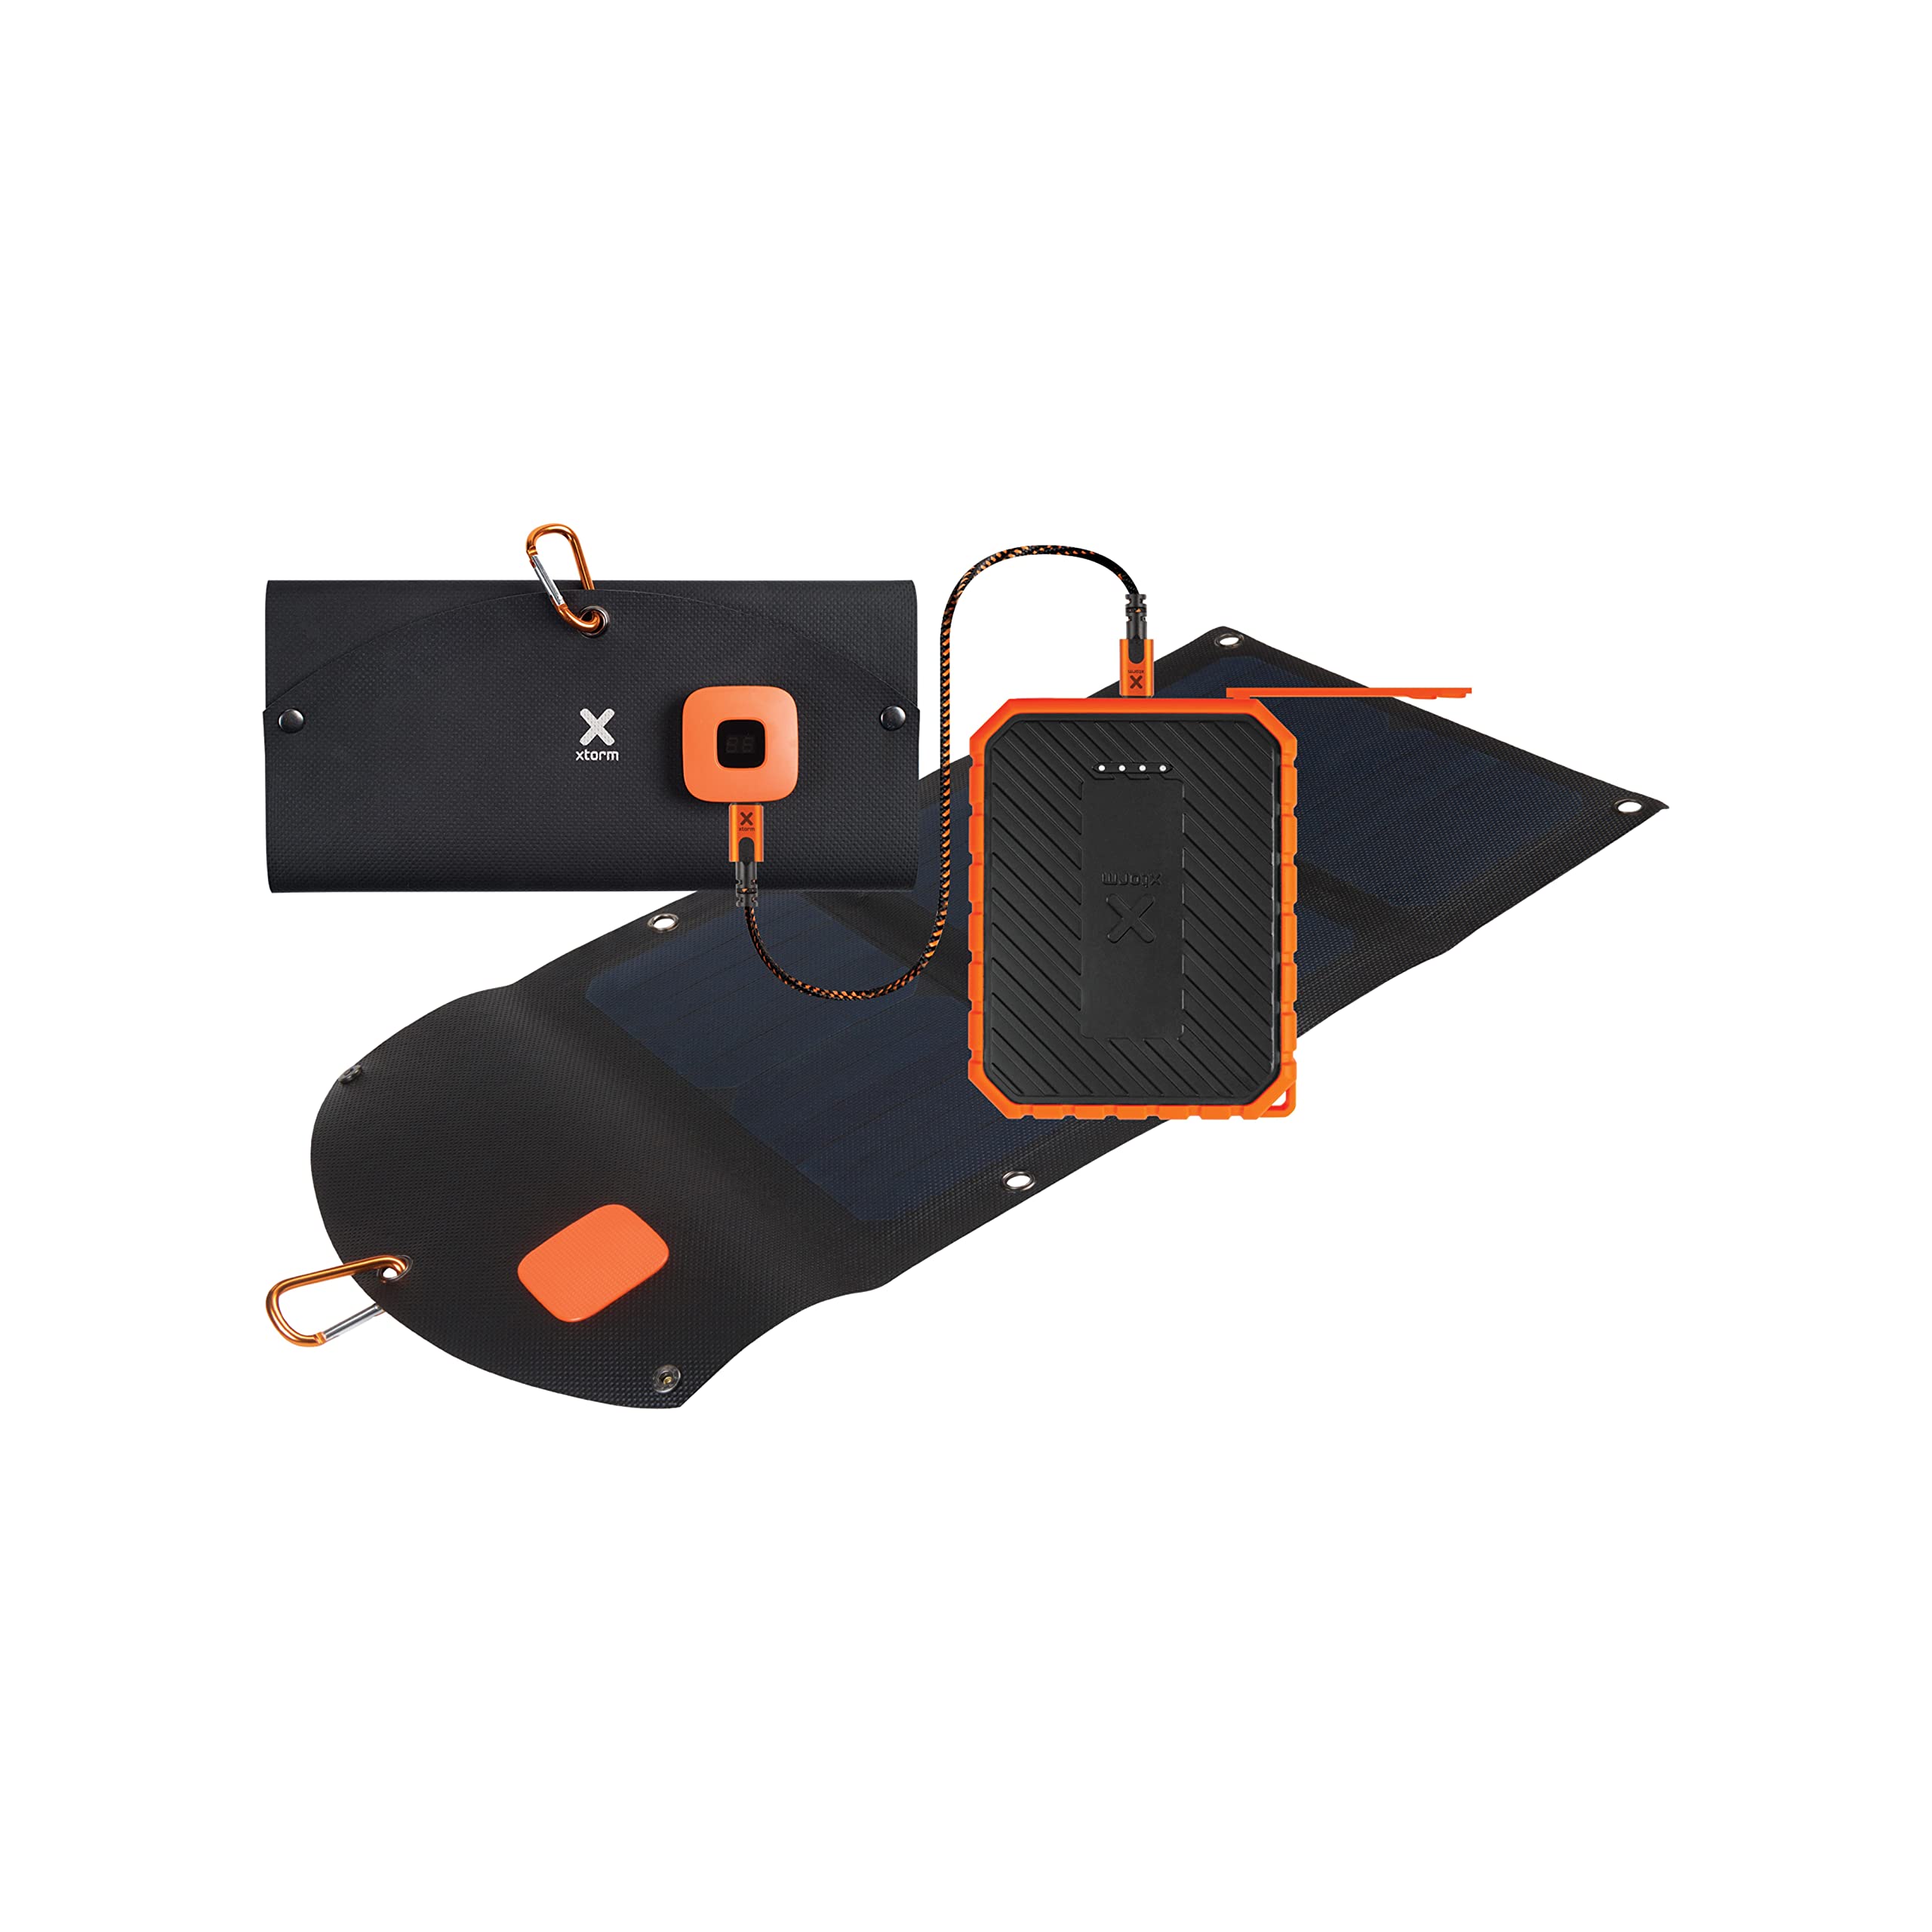 SOLARBOOSTER 21W + RUGGED POWER